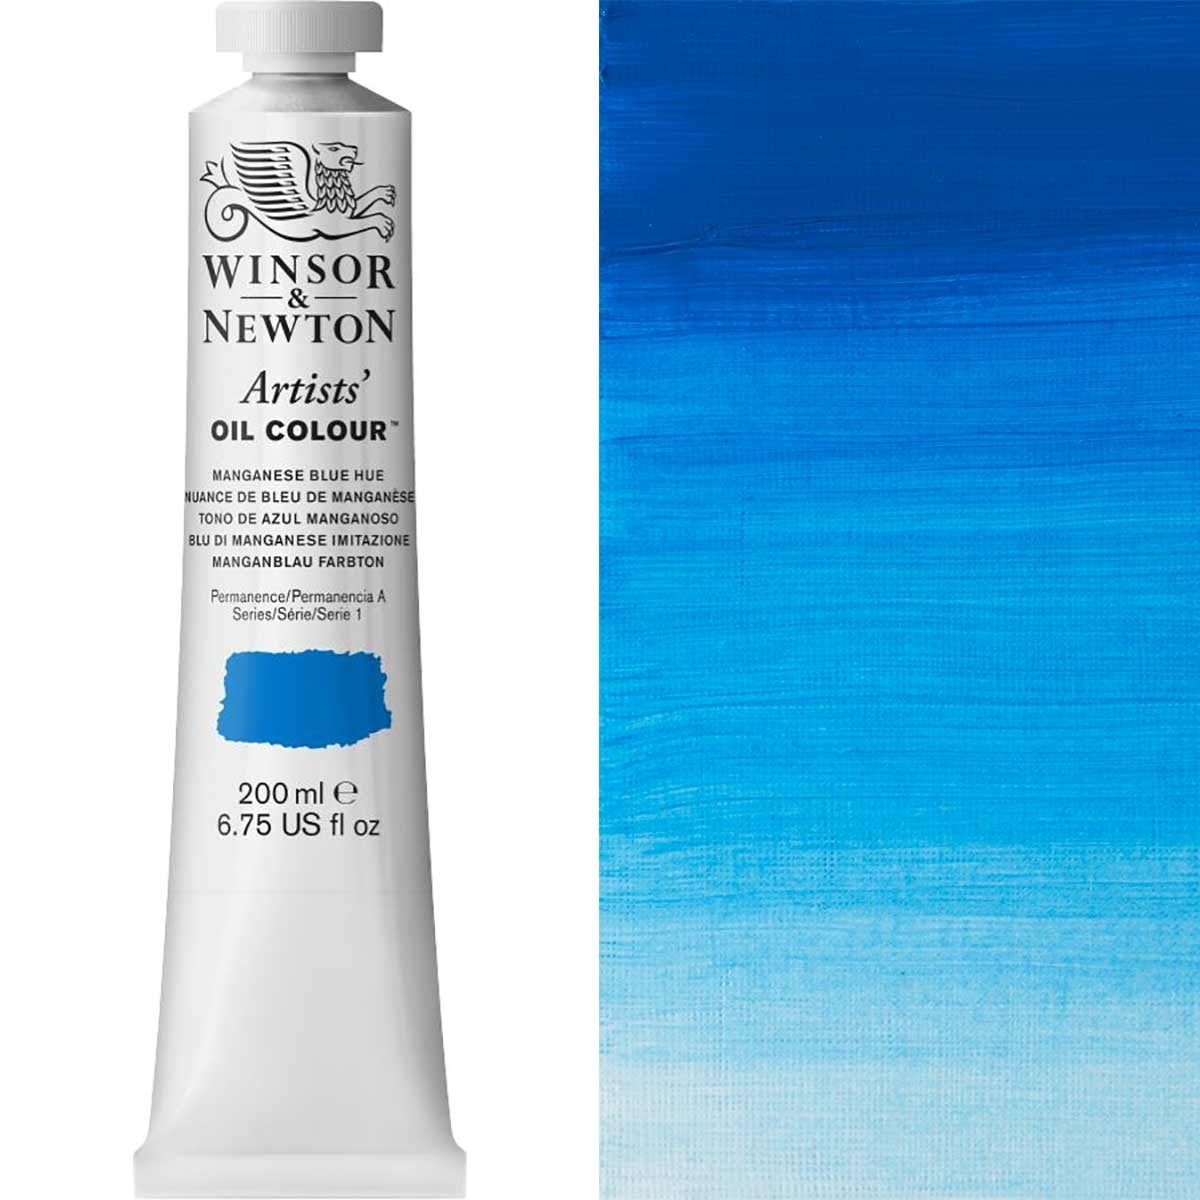 Winsor and Newton - Artists' Oil Colour - 200ml - Manganese Blue Hue